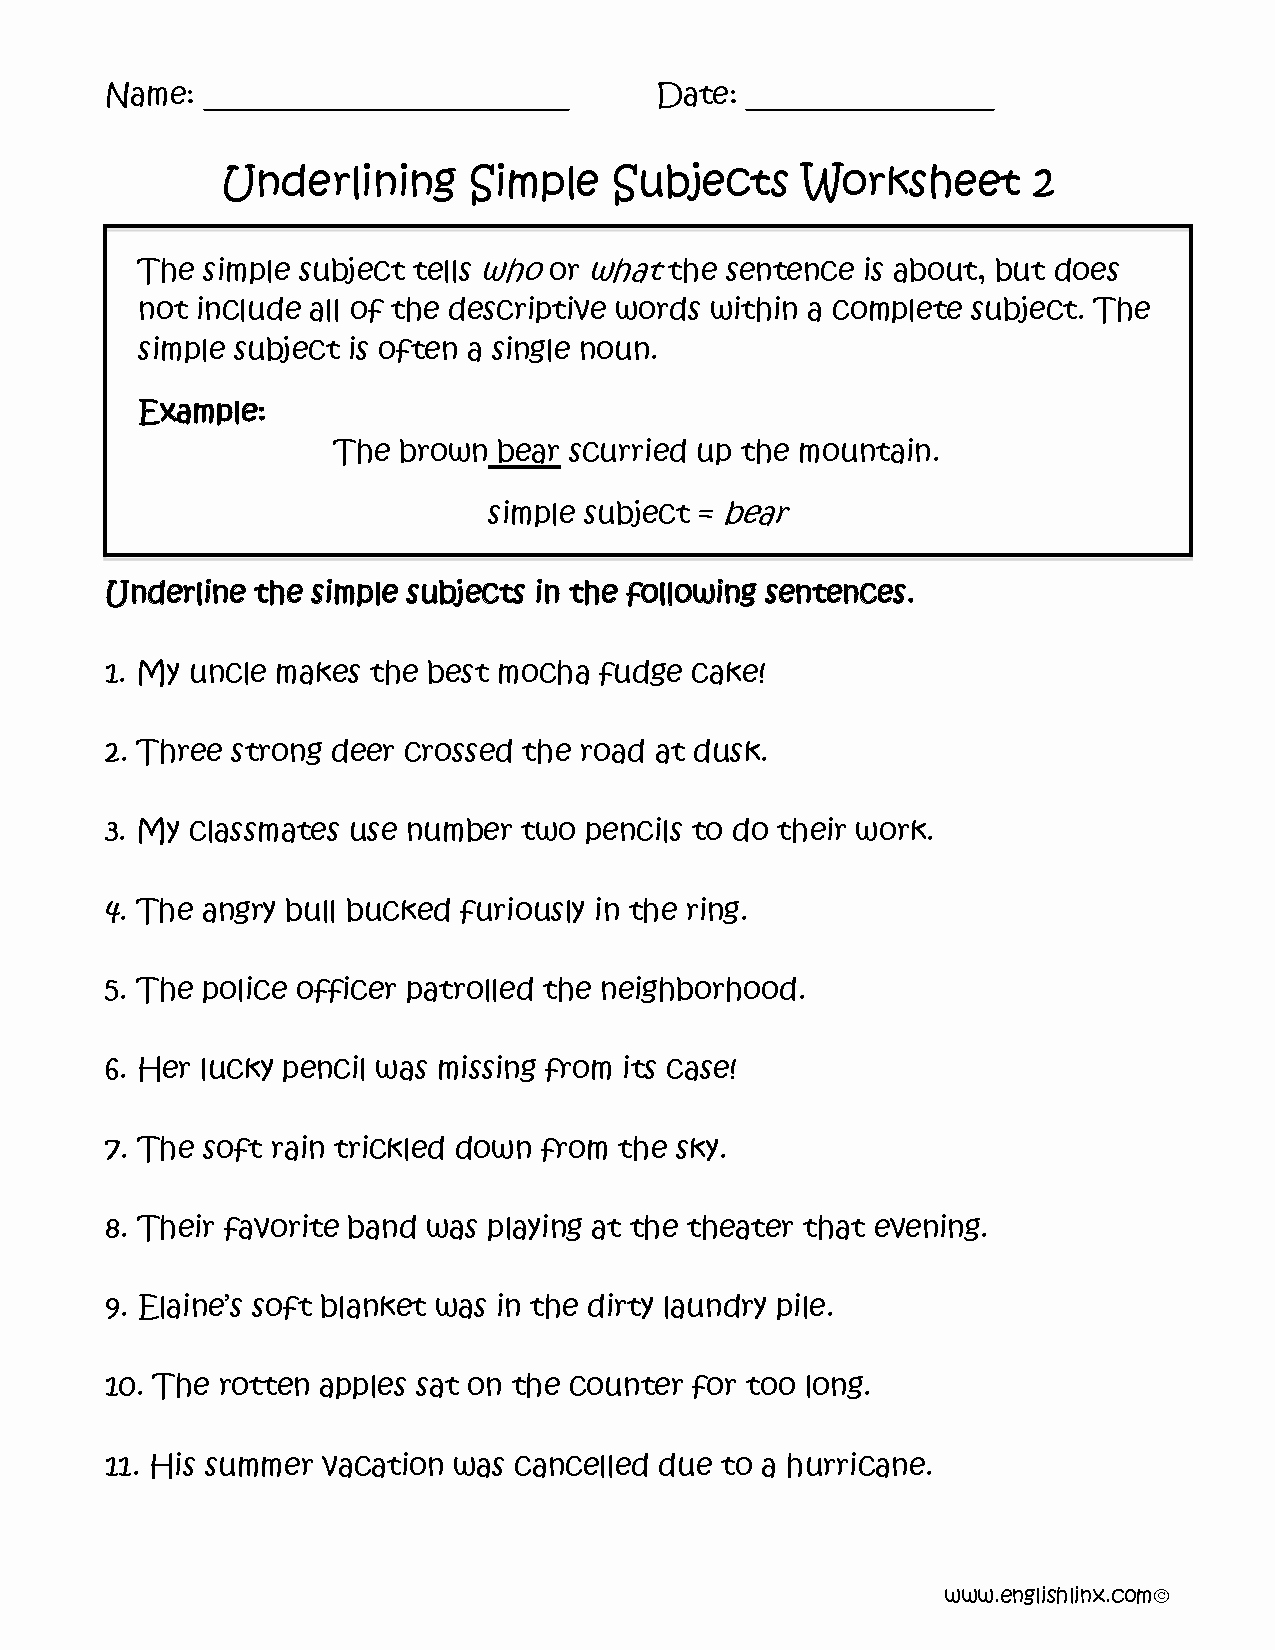 Subjects and Predicates Worksheet New Underlining Simple Subject Worksheet Part 2